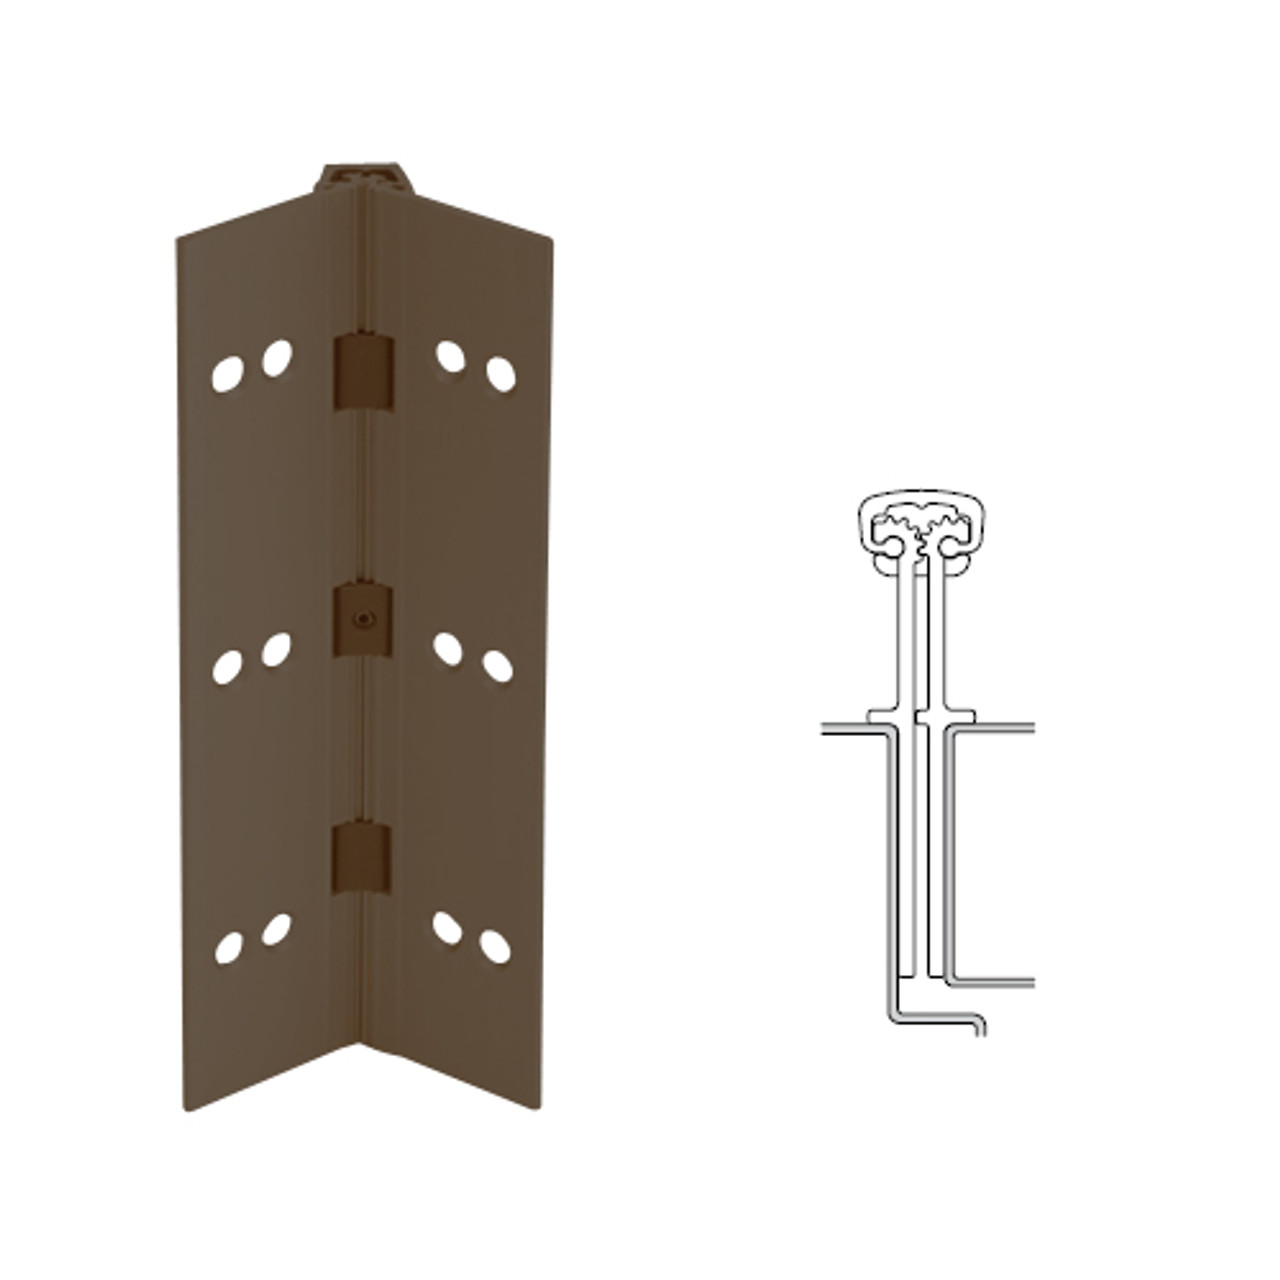 040XY-313AN-120-WD IVES Full Mortise Continuous Geared Hinges with Wood Screws in Dark Bronze Anodized